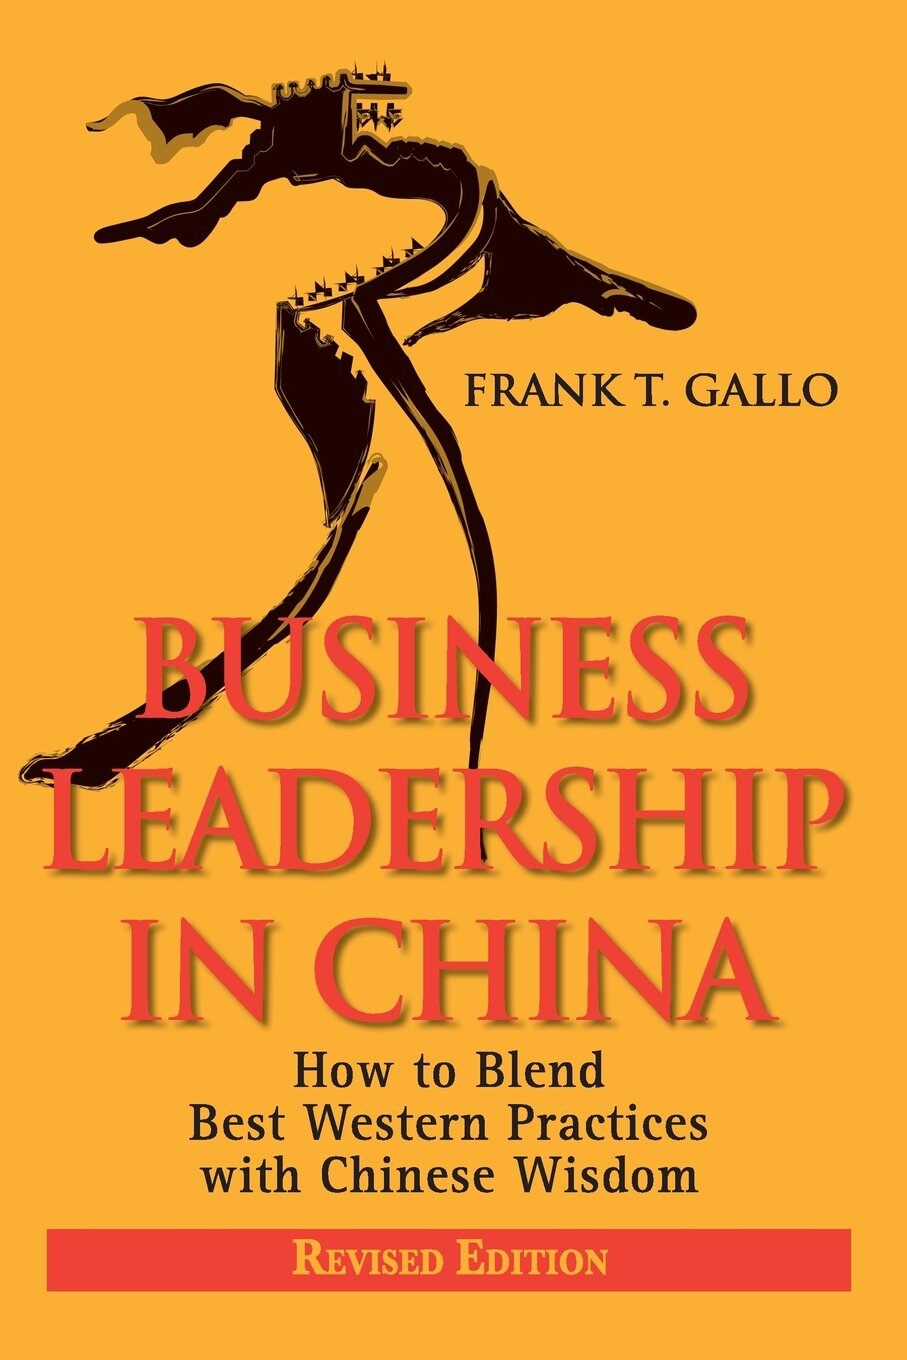 『Business Leadership in China』  ～How to Blend Best Western Practices with Chinese Wisdom～